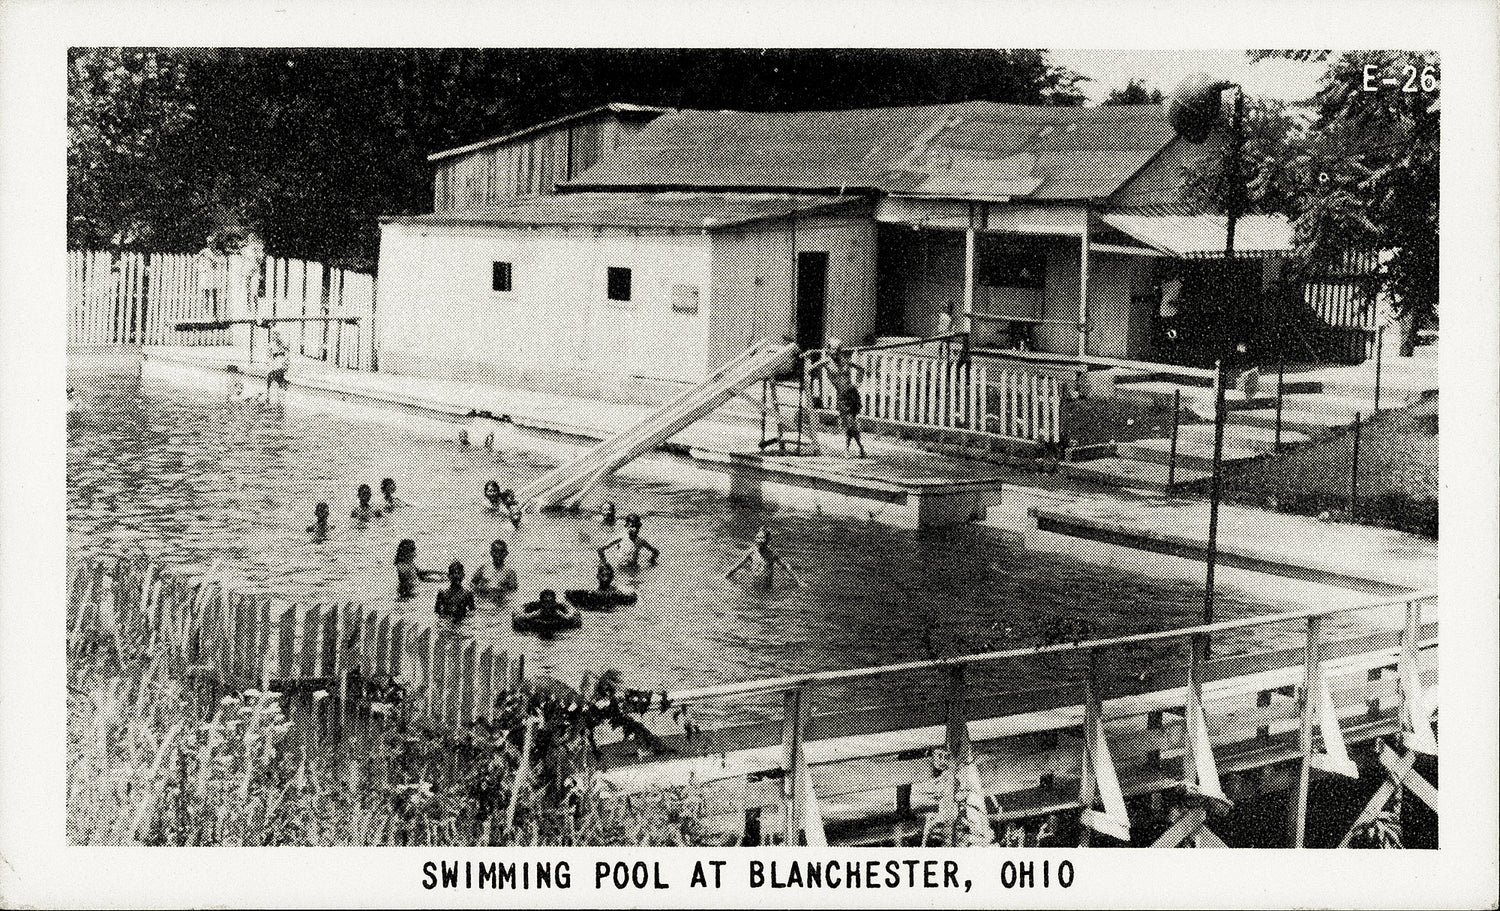 Blanchester Swimming Pool